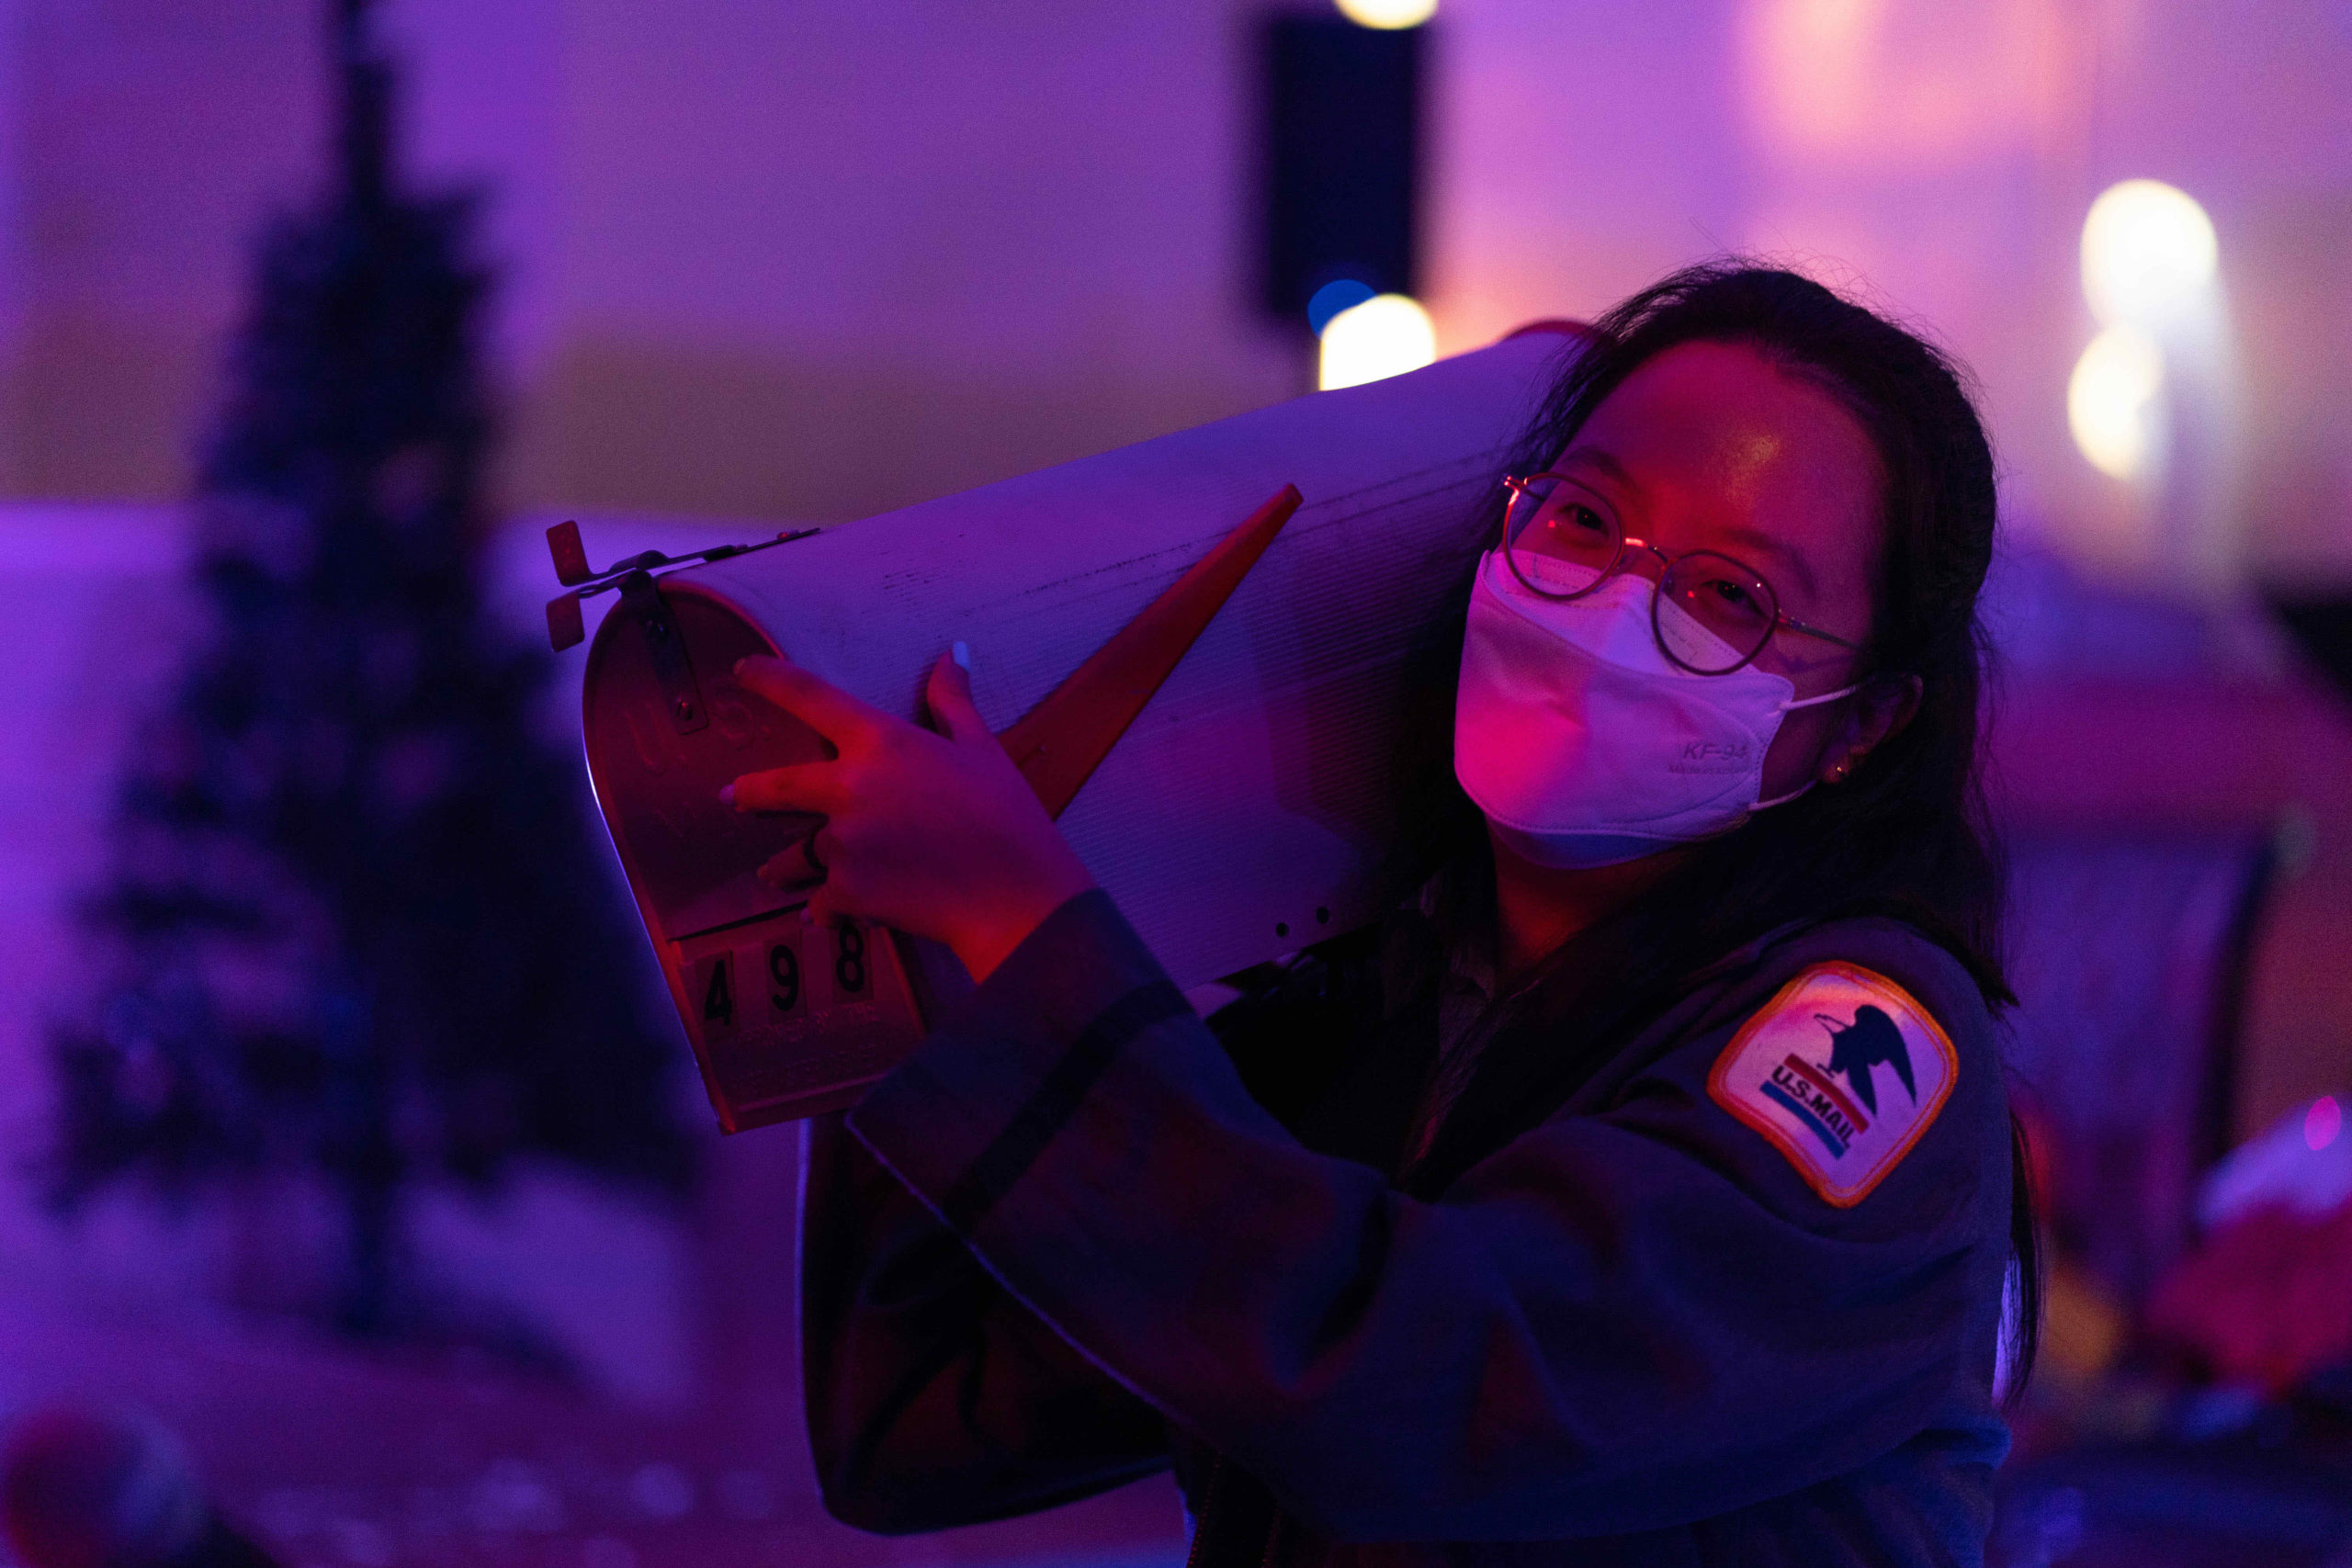 Haley Baek is in a postal worker uniform, glasses, and a white mask and carries a mailbox on her shoulder, looking delighted.